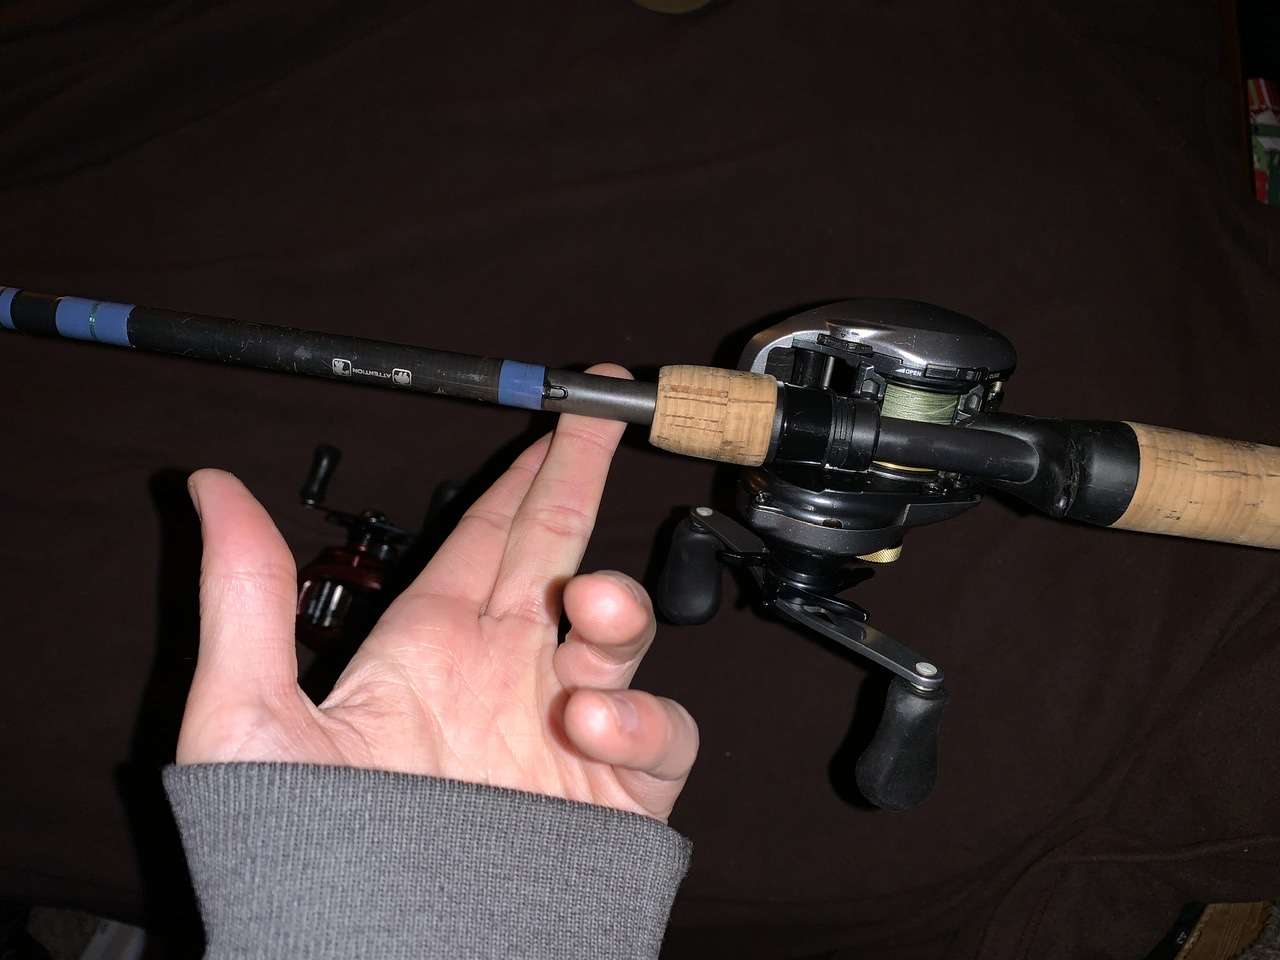 Aldebaran rod pairing + NRX analysis - Fishing Rods, Reels, Line, and Knots  - Bass Fishing Forums